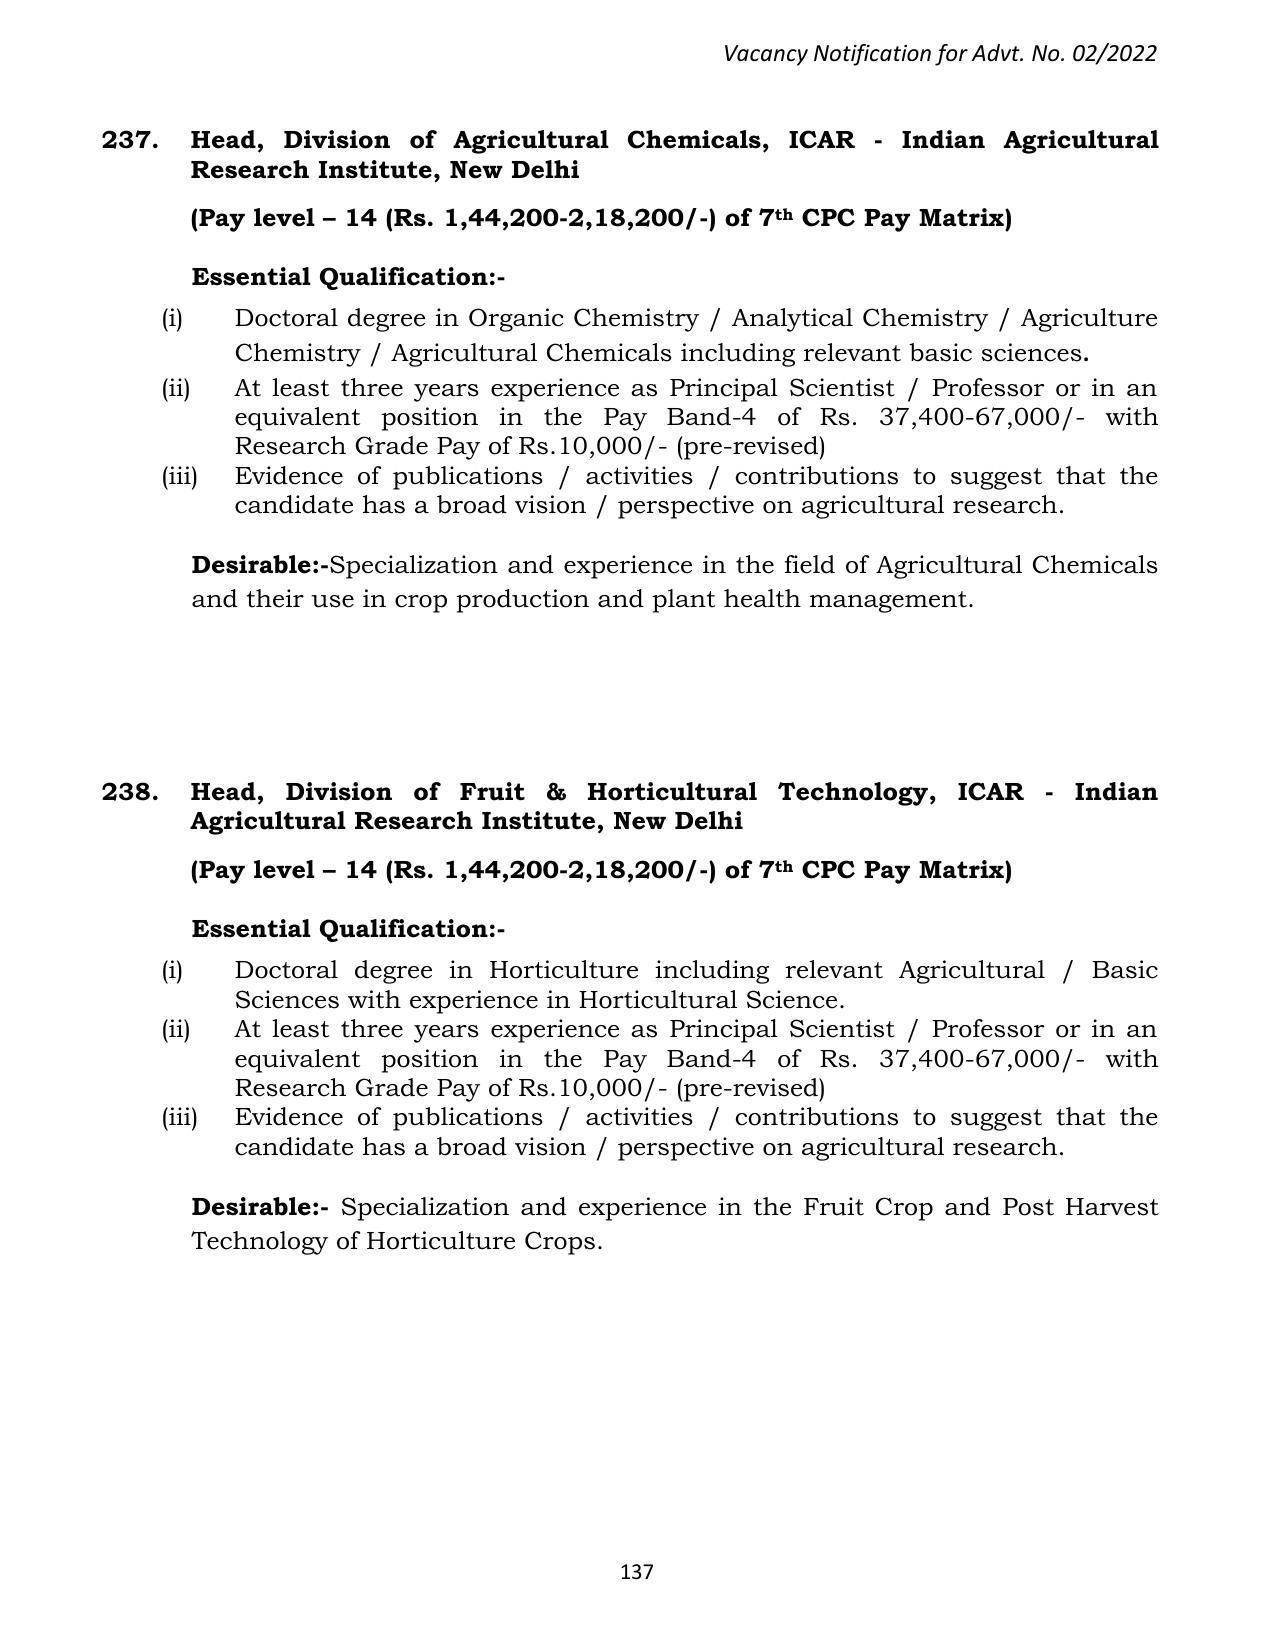 ASRB Non-Research Management Recruitment 2022 - Page 166